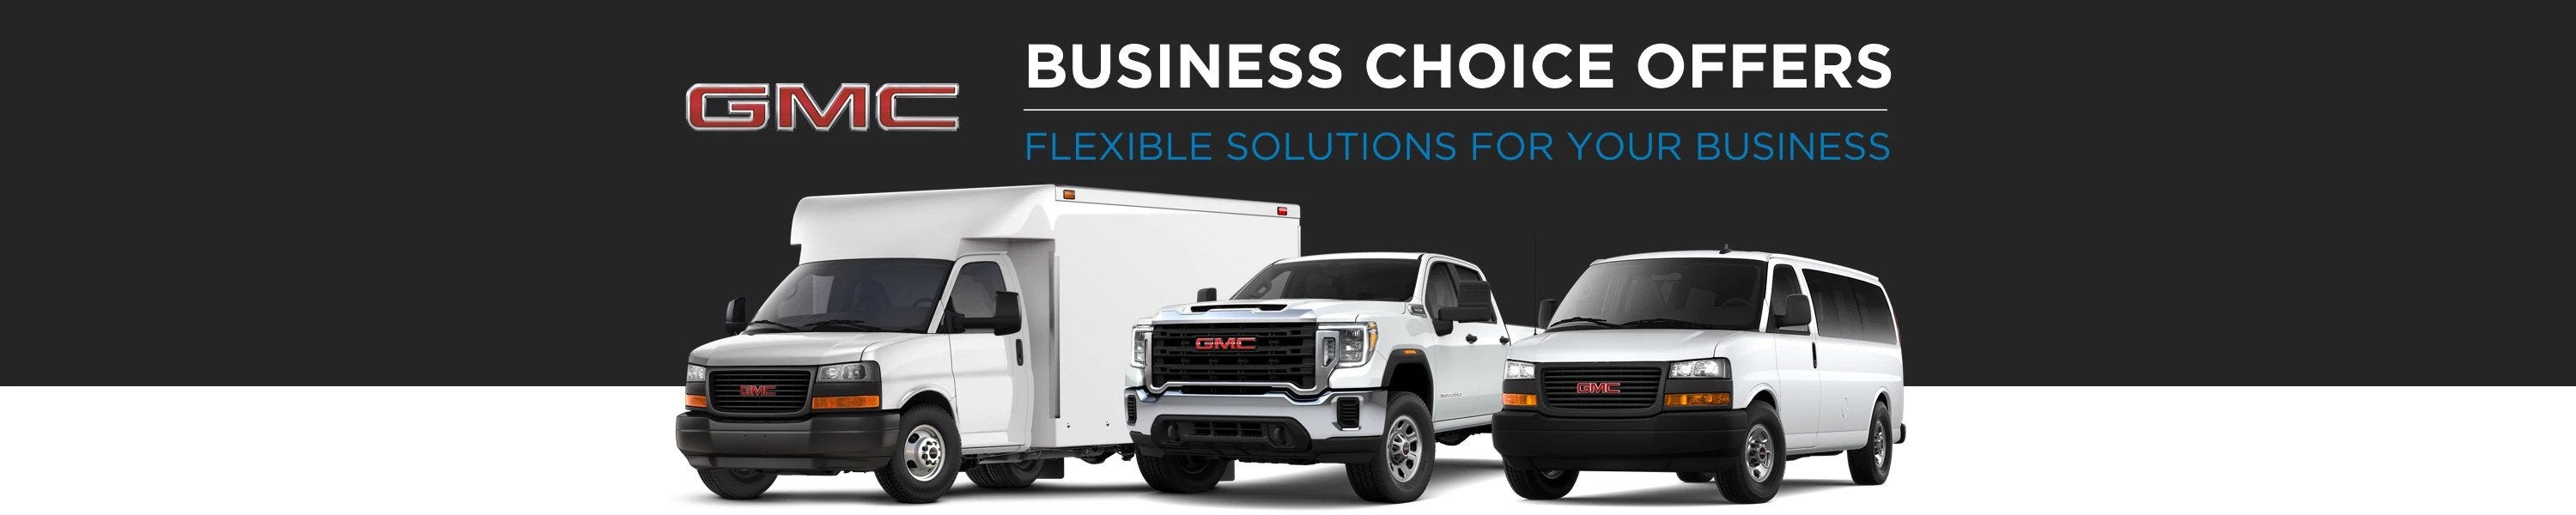 GMC Business Choice Offers - Flexible Solutions for your Business - Lipscomb Chevrolet Buick GMC in Bowie TX